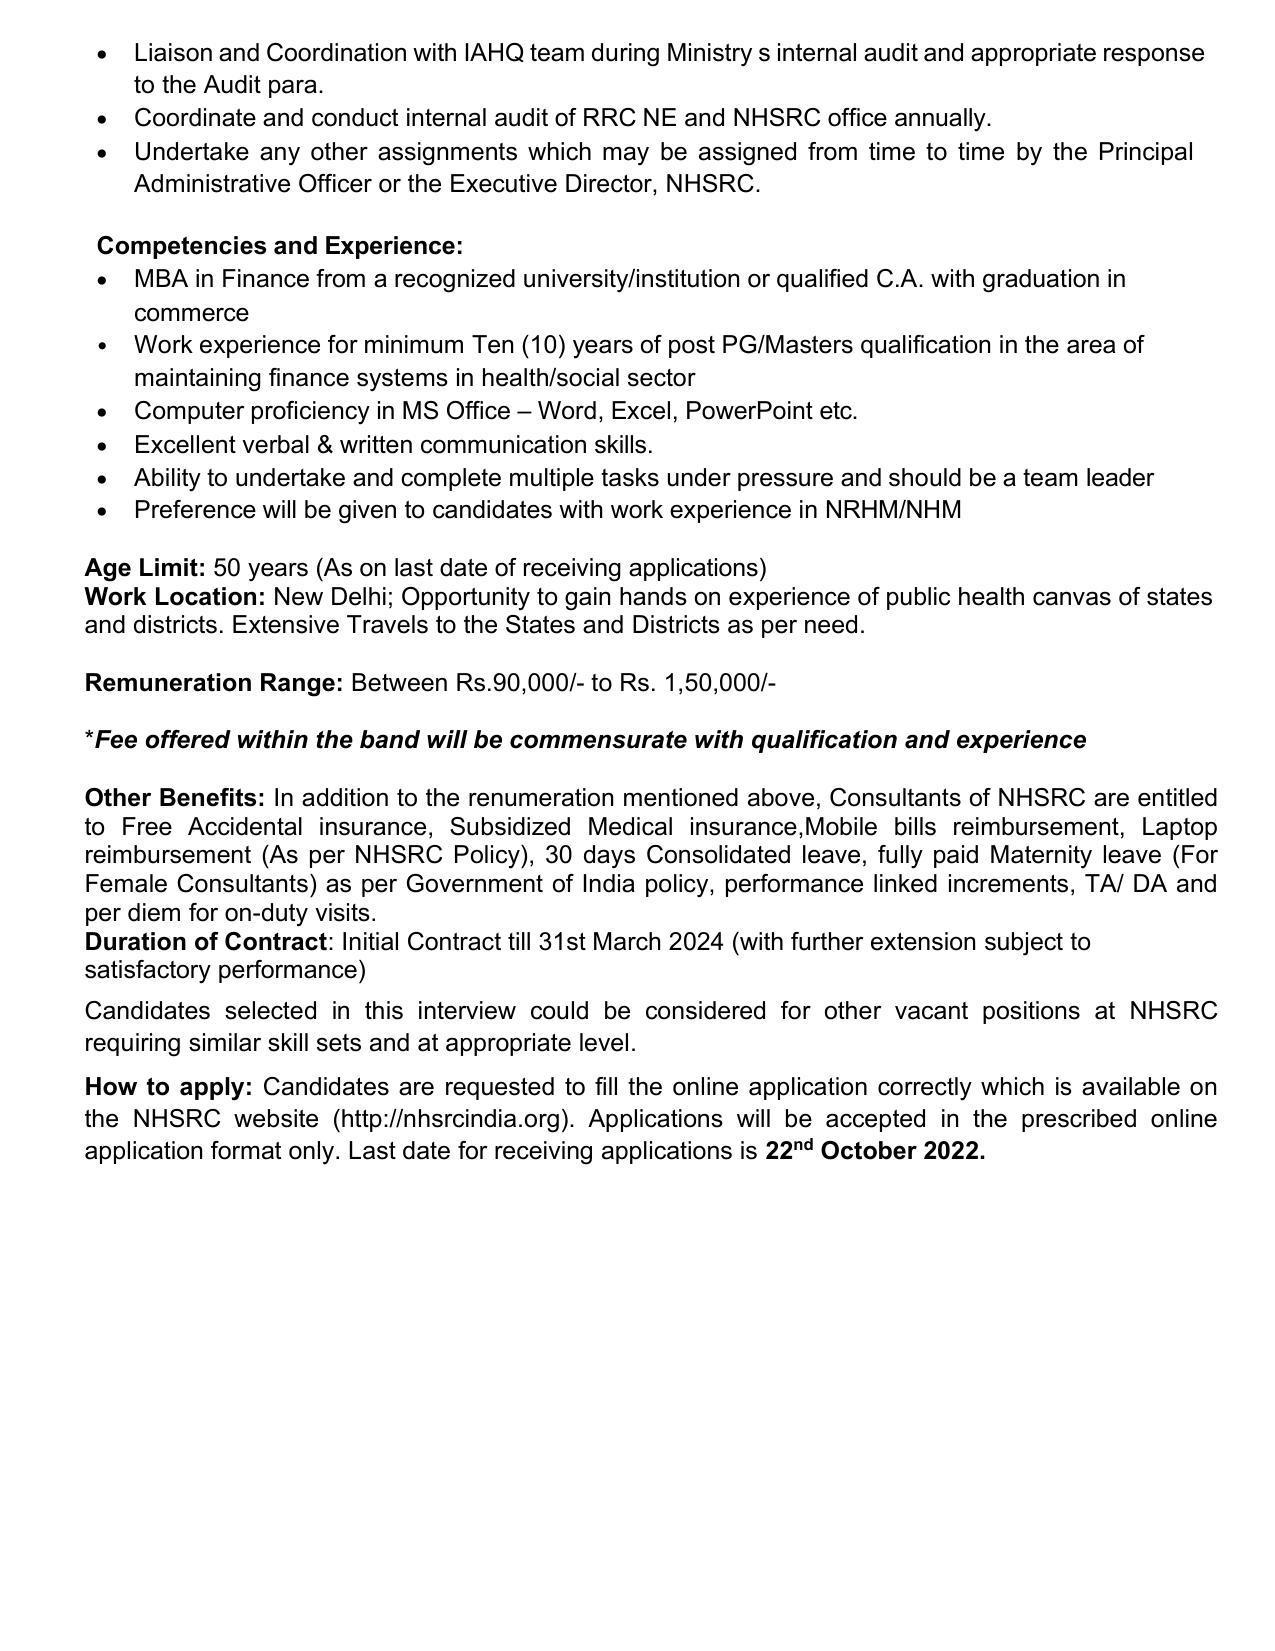 National Health Systems Resource Centre (NHSRC) Invites Application for Finance Manager Recruitment 2022 - Page 1